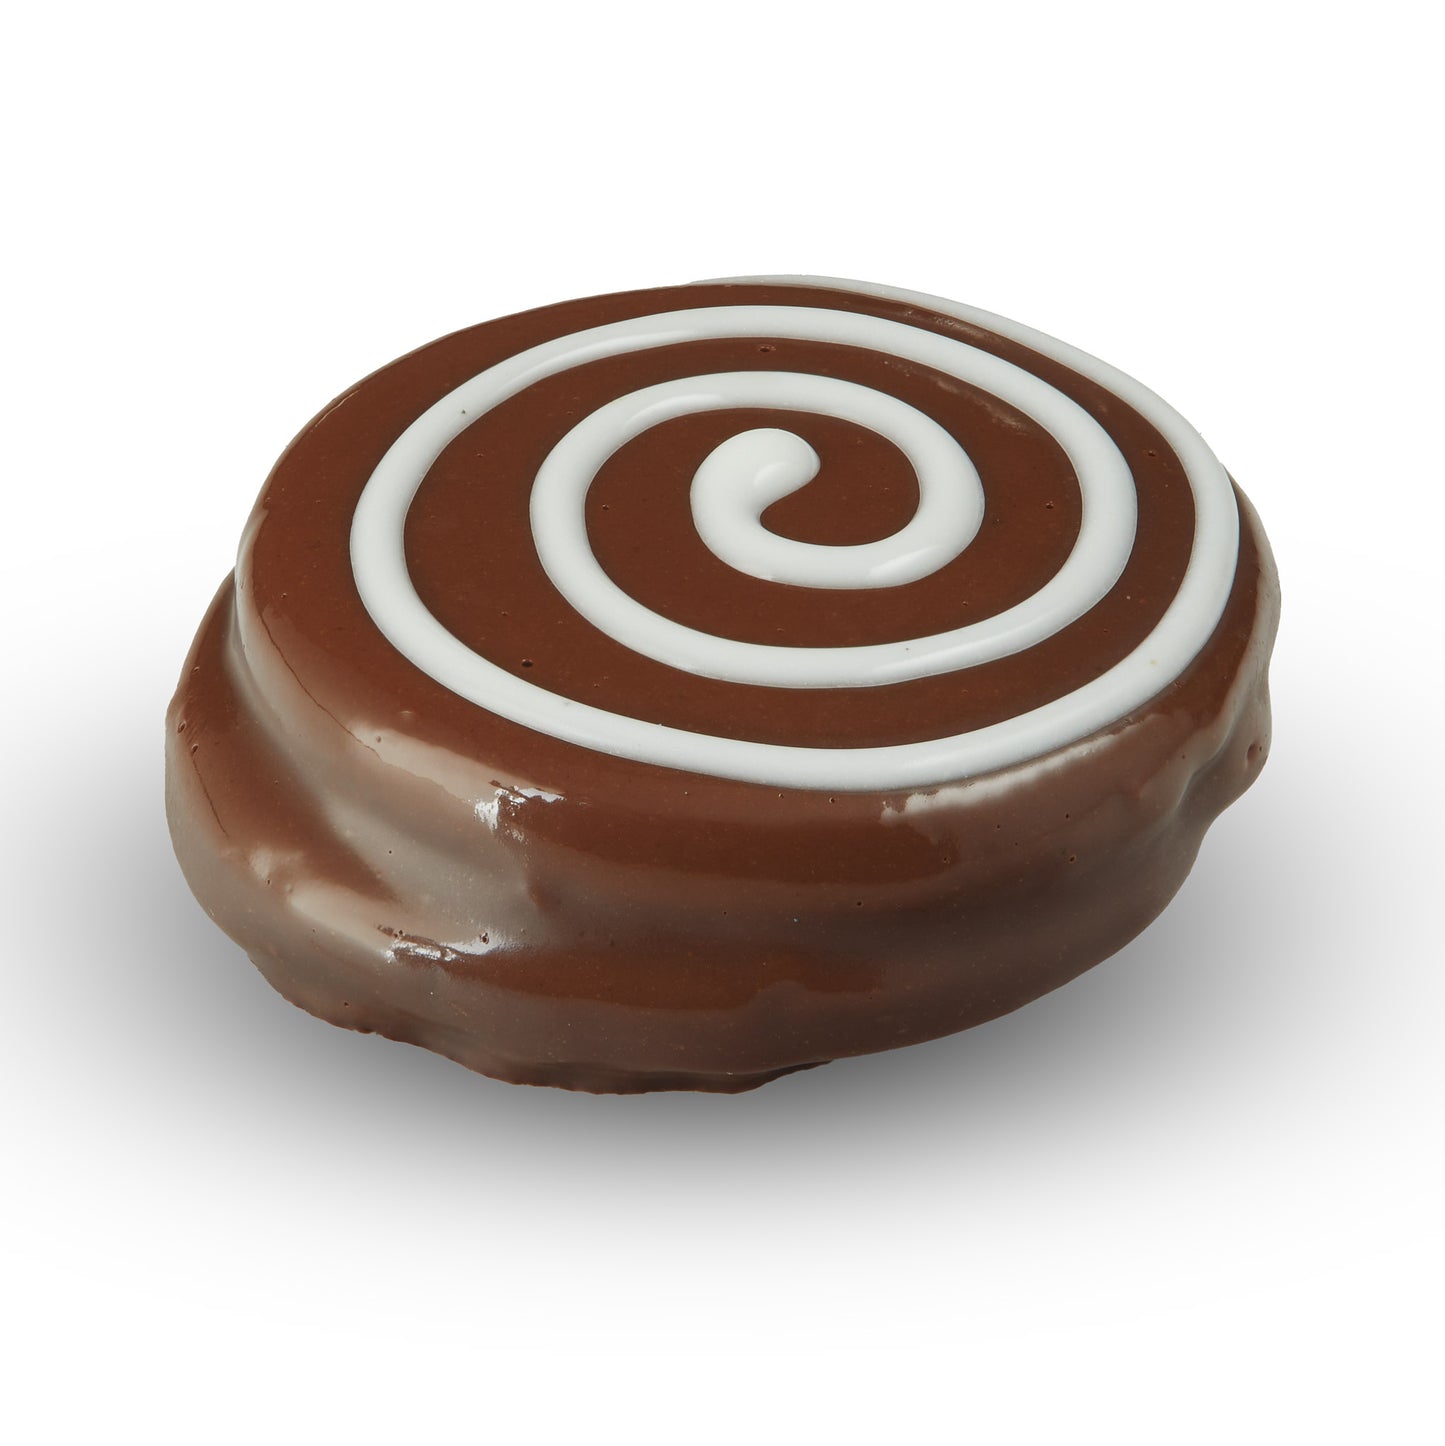 Swirl Topped Chocolate Dipped Cookies